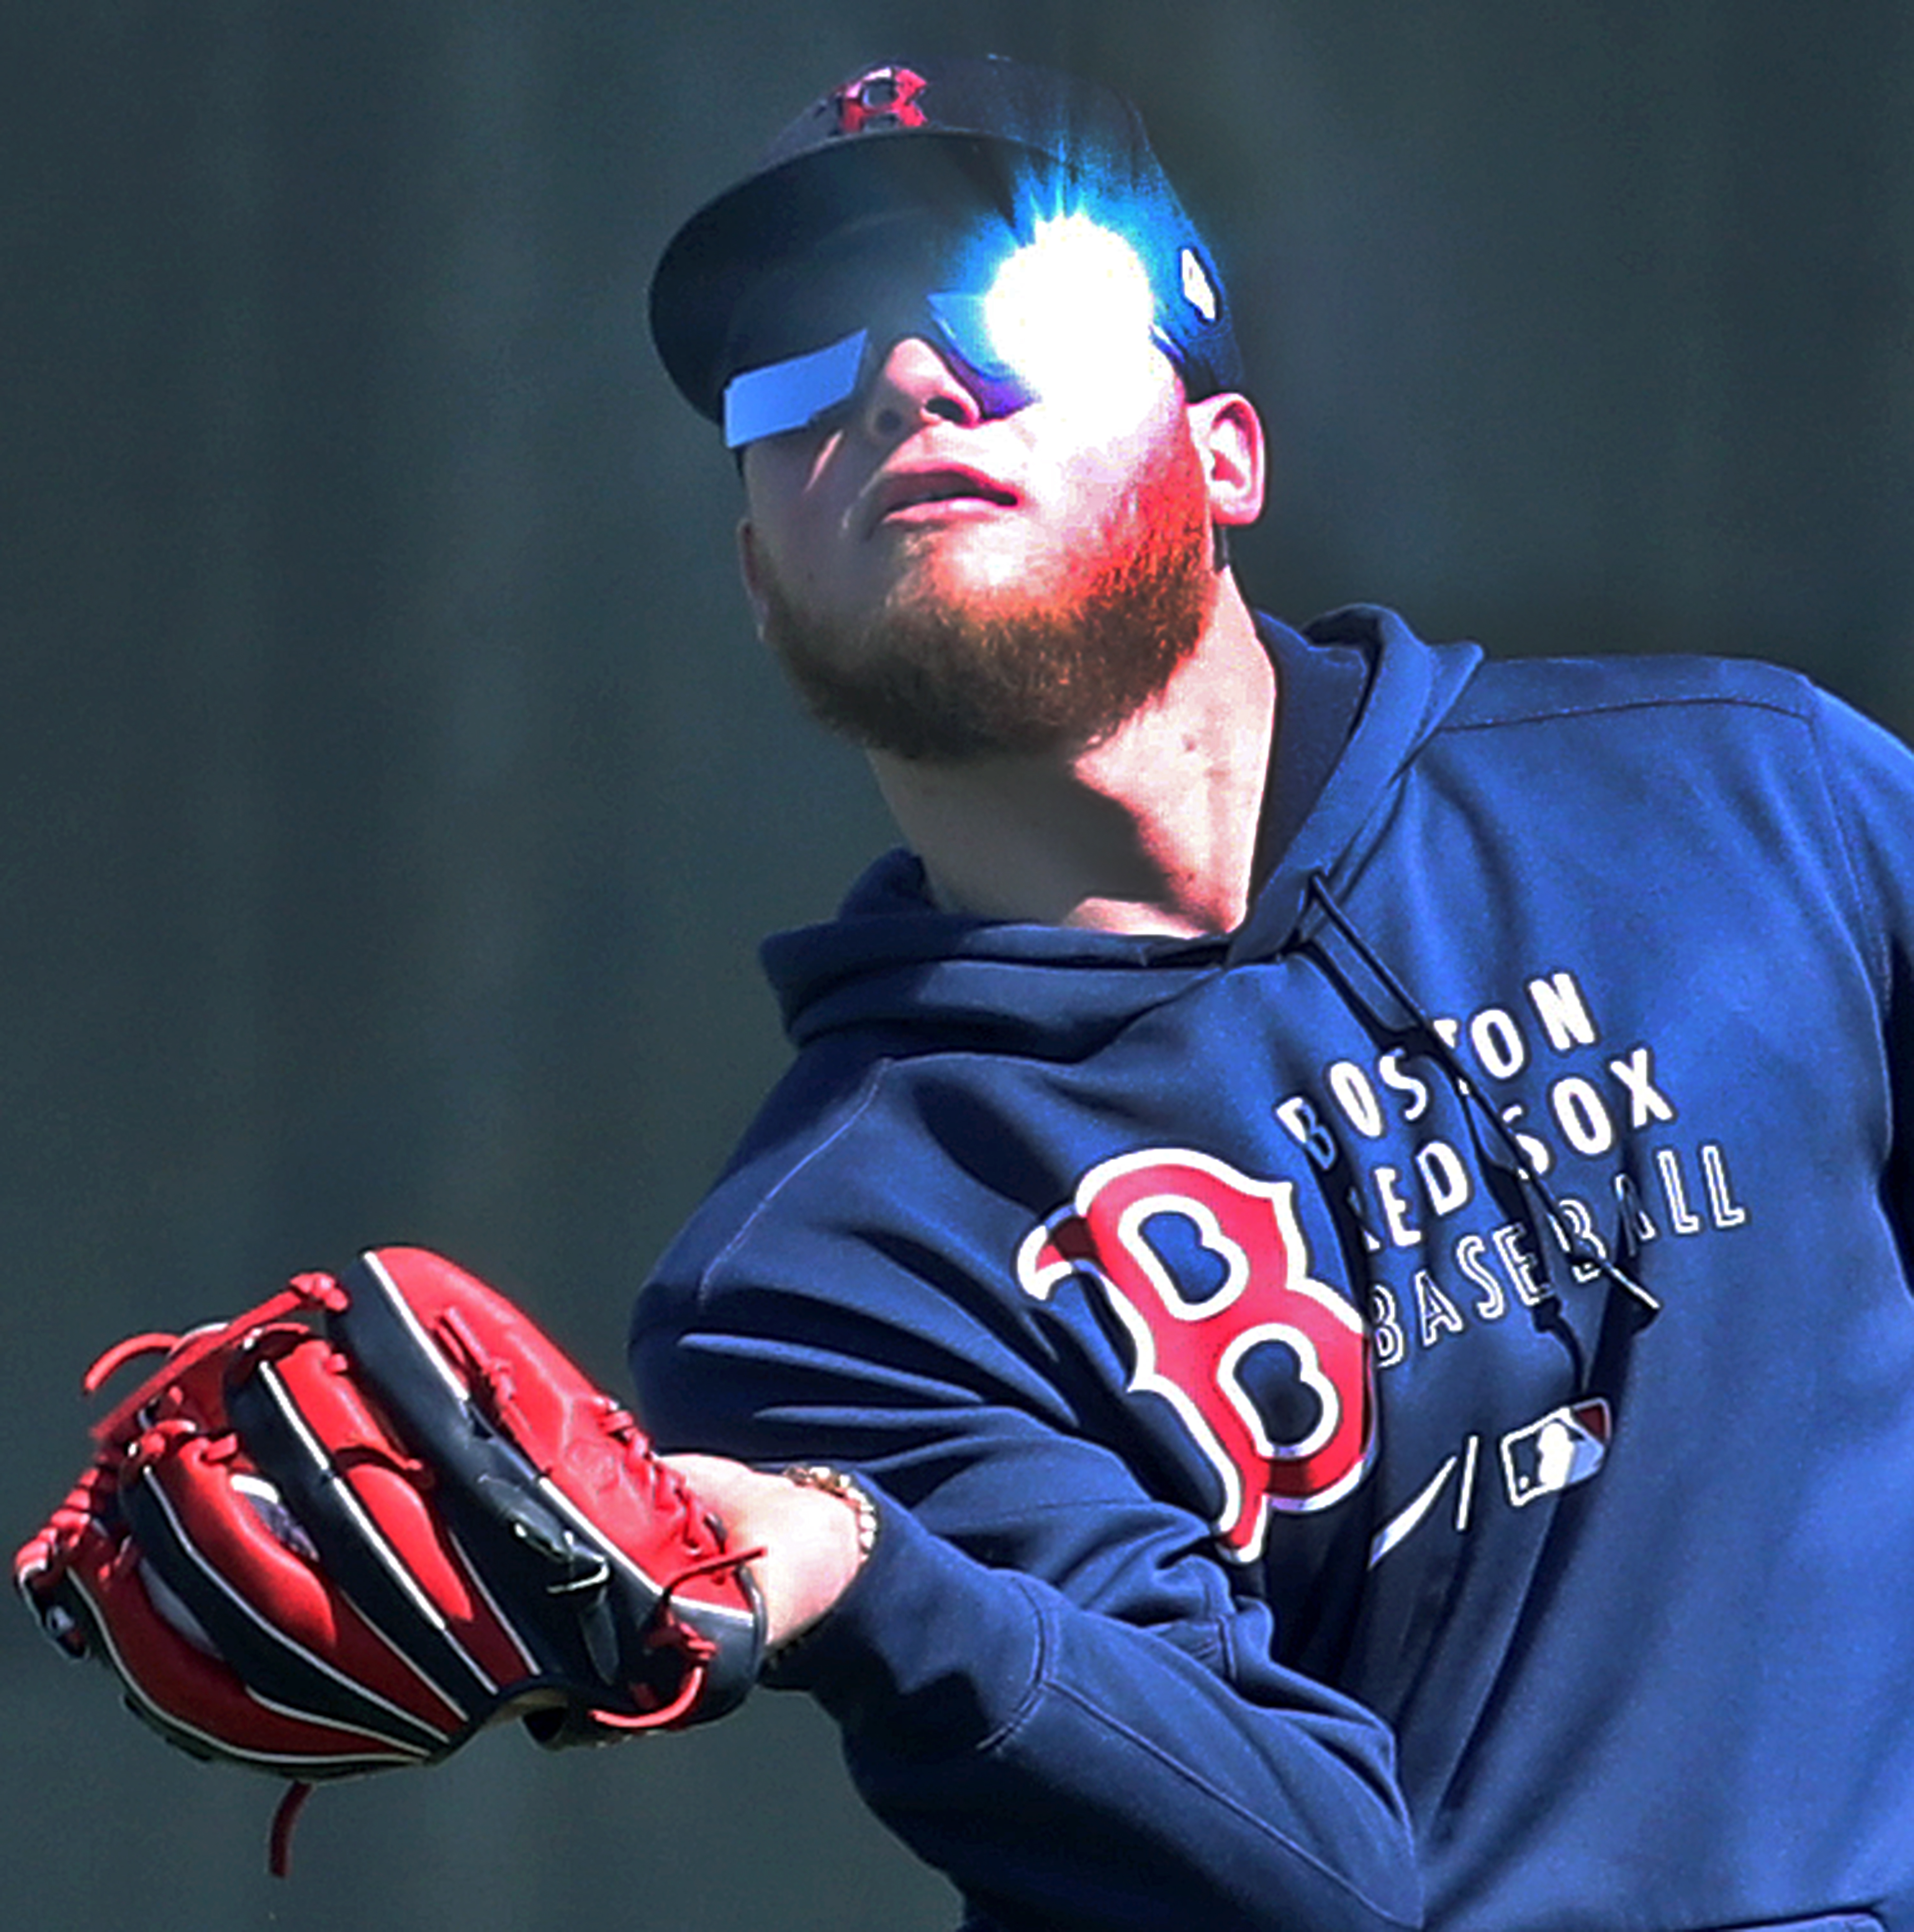 How the Red Sox' Alex Verdugo has had to adjust getting his swing ready for  the season - The Boston Globe